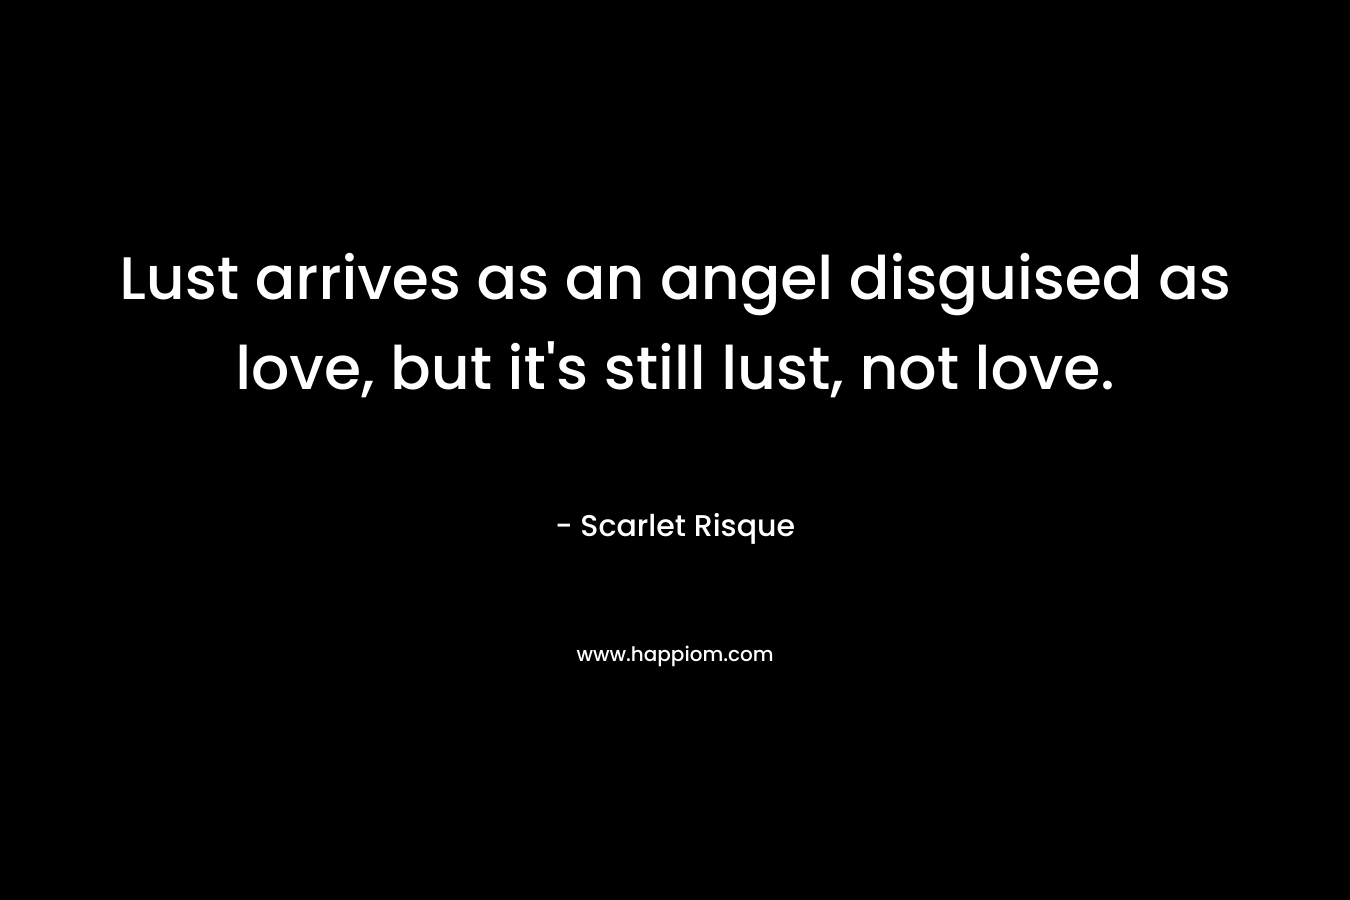 Lust arrives as an angel disguised as love, but it’s still lust, not love. – Scarlet Risque